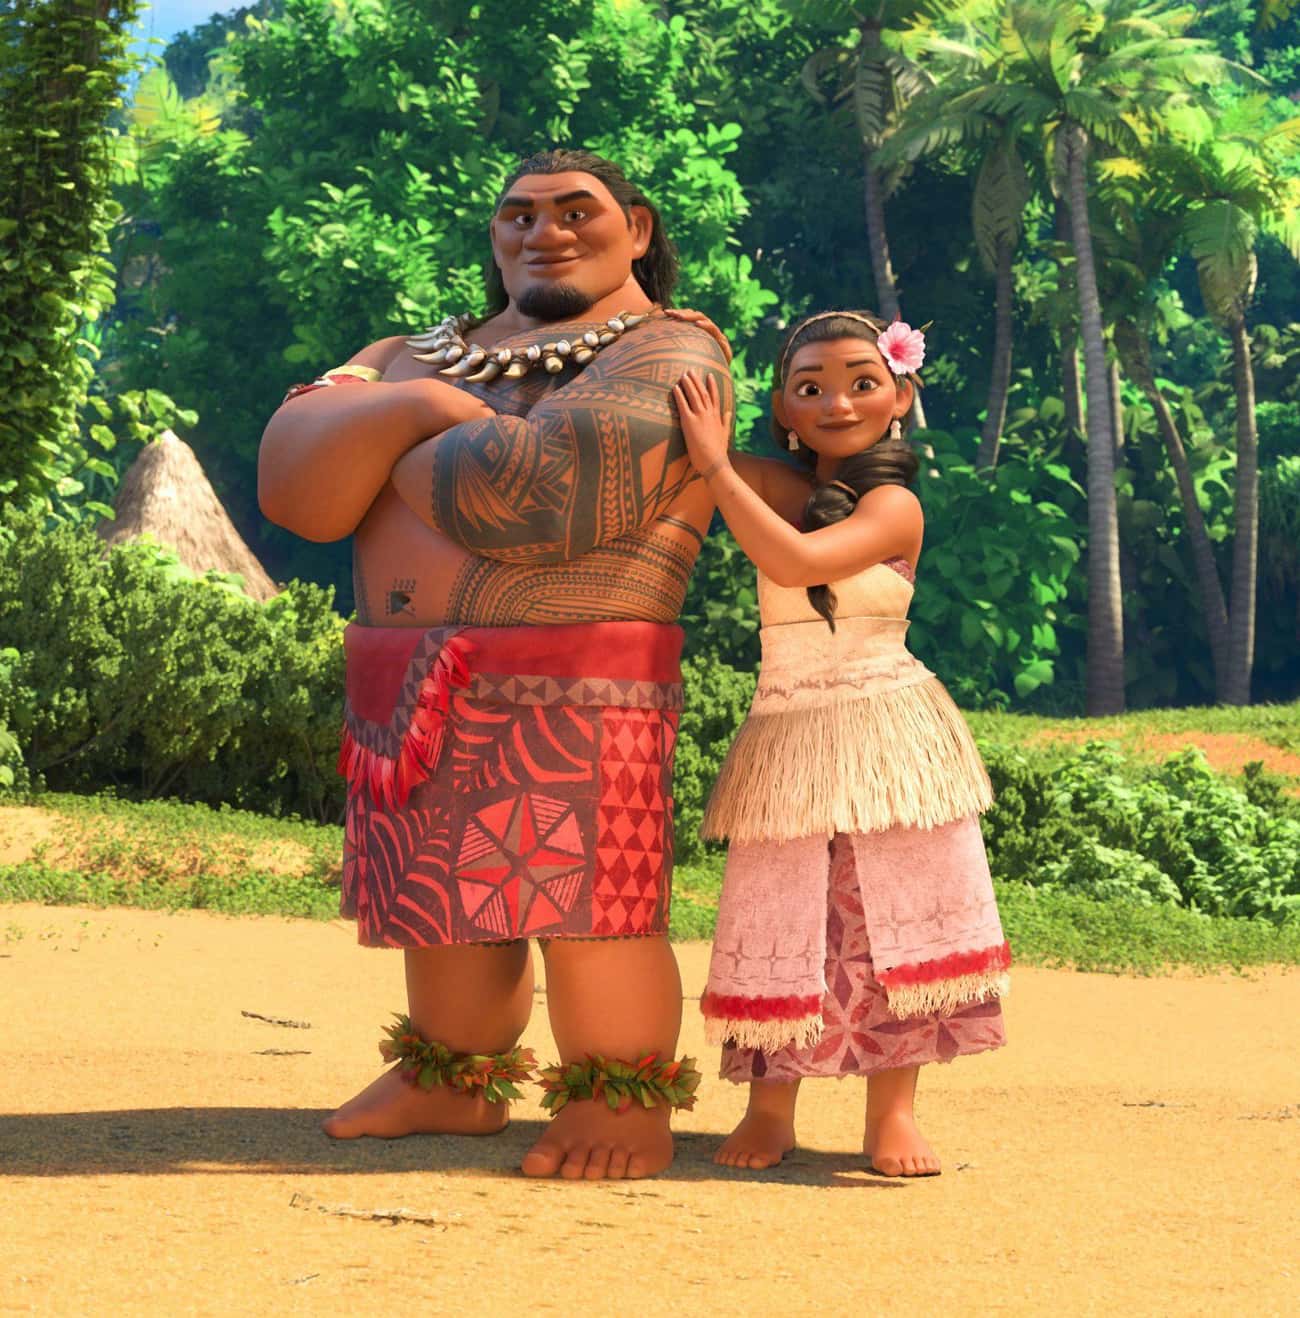 Moana Disagrees with Her Family, But They All Respect Each Other